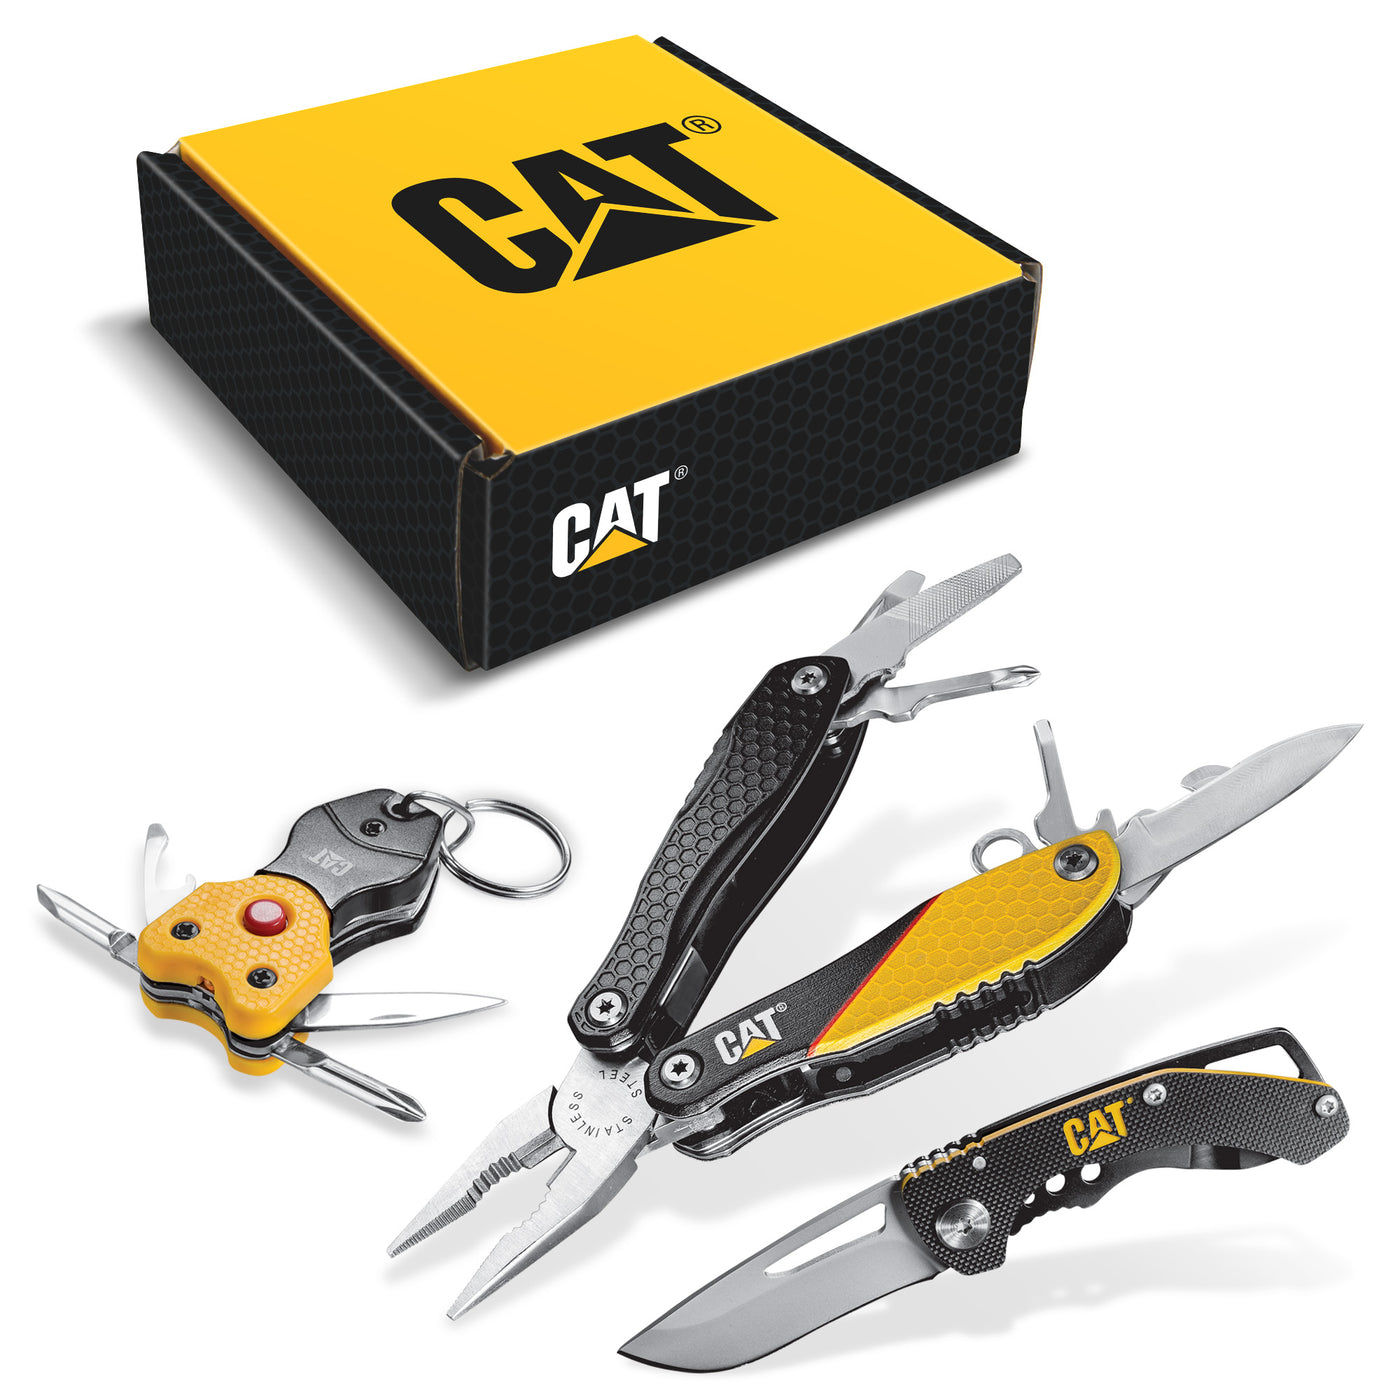 3 Piece Multi Tool and Pocket Knife Gift Set Box